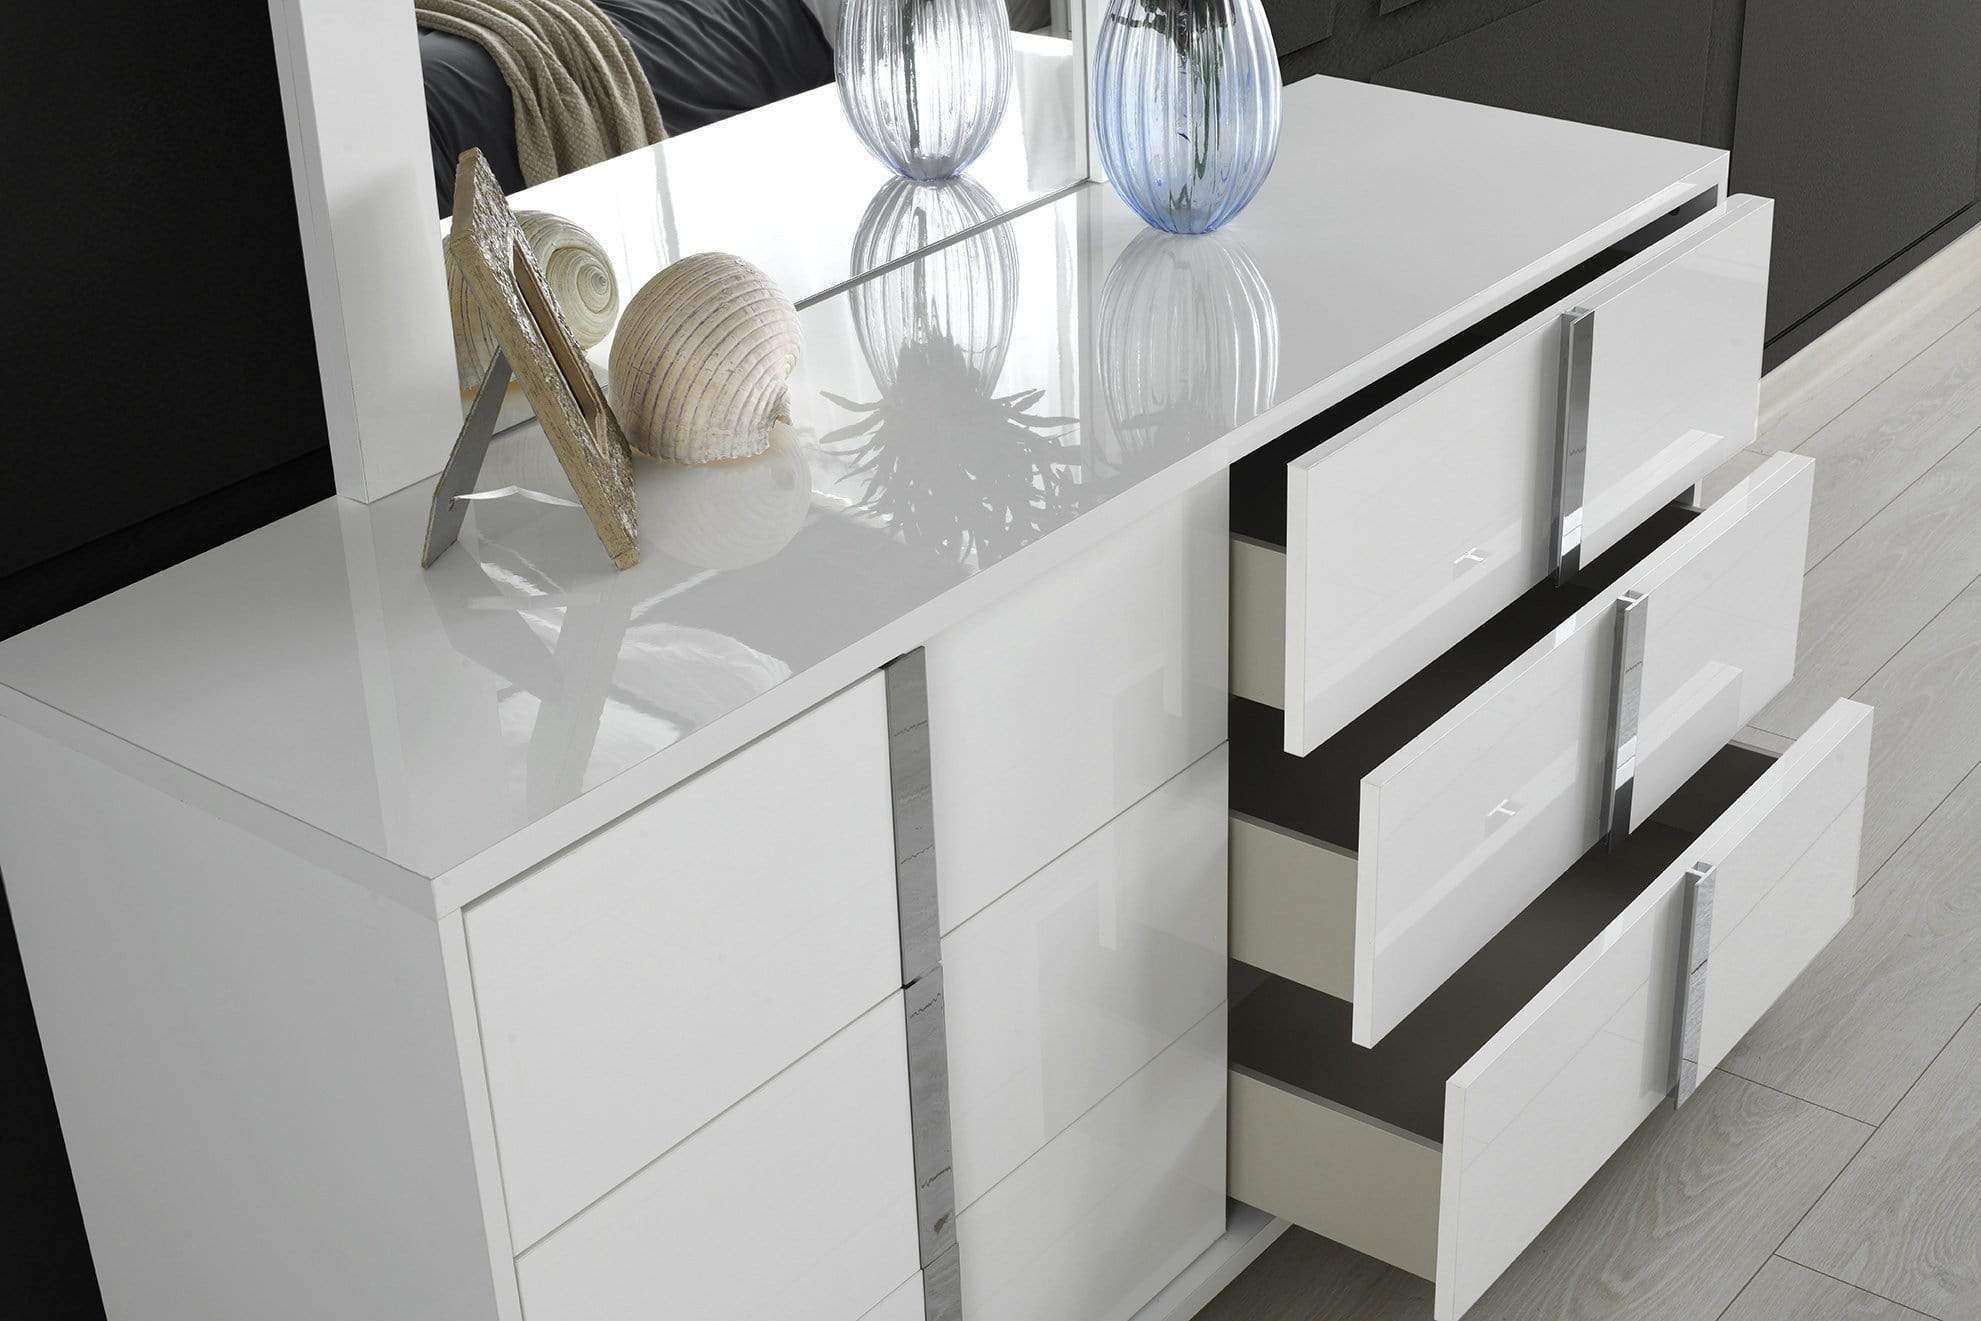 J and M Furniture Bedroom Furniture Sets Giulia Bedroom Collection in Gloss White | J&M Furniture